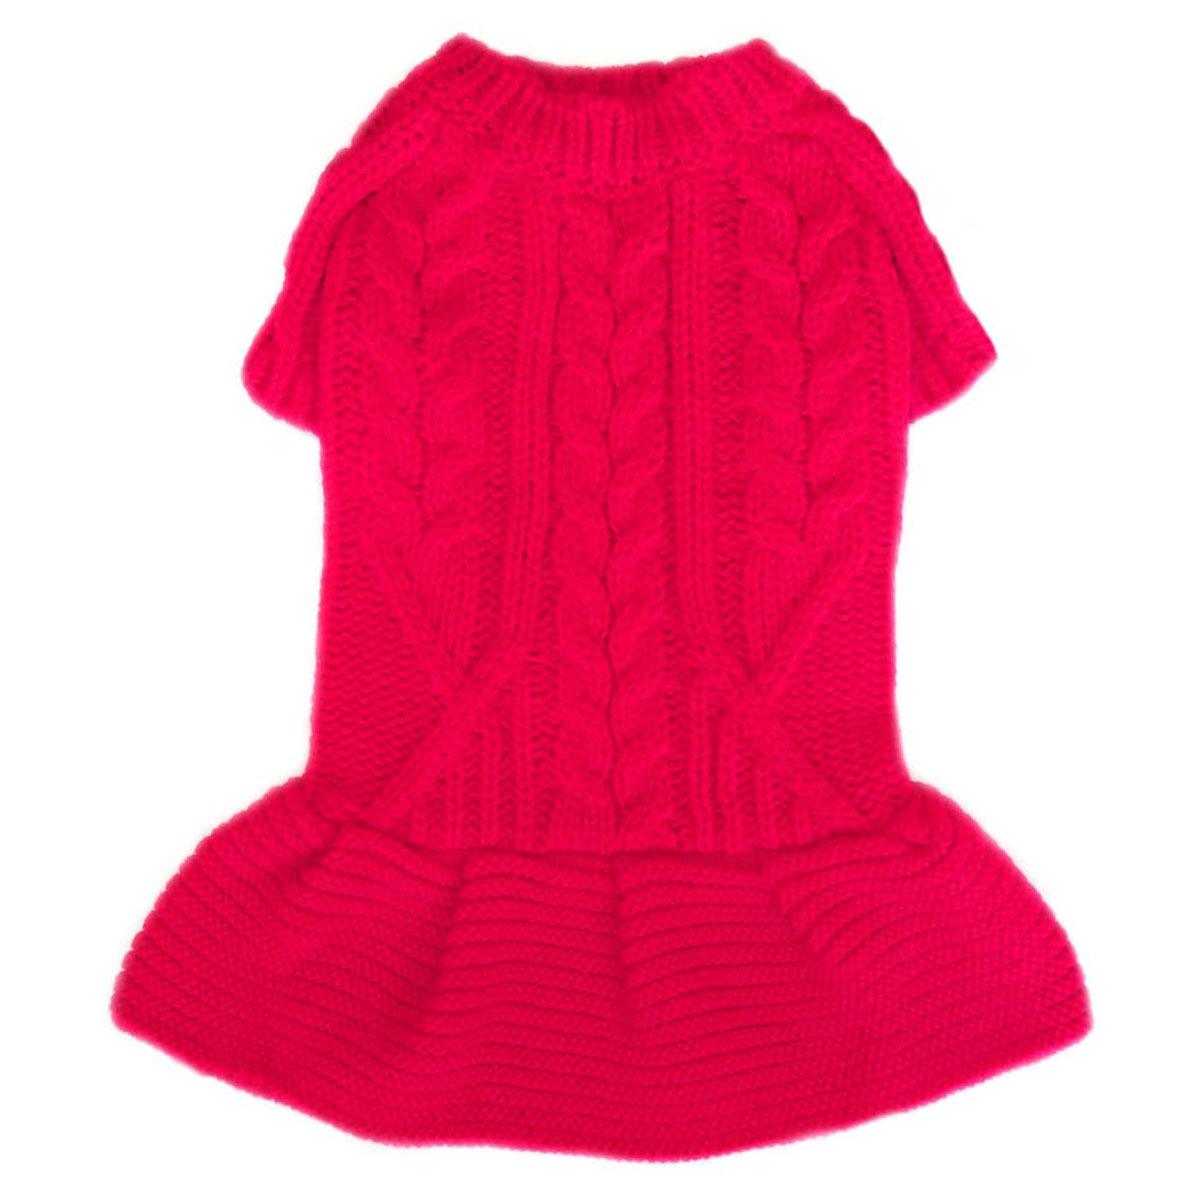 Pooch Outfitters Georgia Dog Sweater Dress - Red